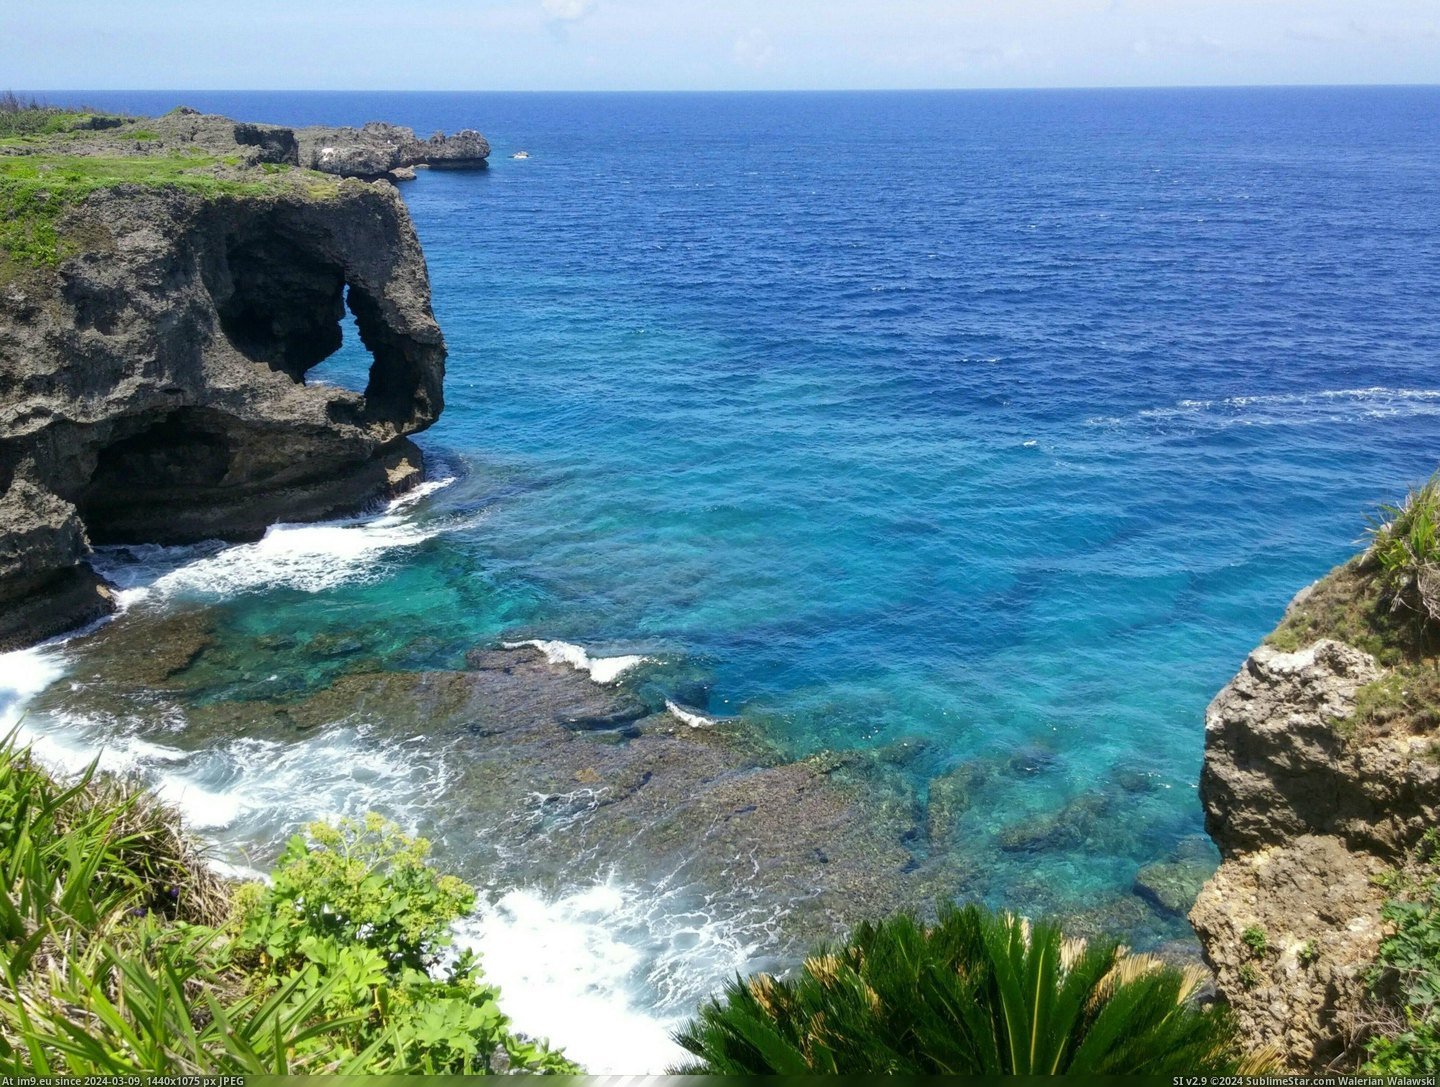 #Japan #Sea #Cape #Breathtaking #China #East [Earthporn] Breathtaking view of Cape Manzamo in Okinawa with the East China Sea in the background. Japan sure has some beautifu Pic. (Image of album My r/EARTHPORN favs))